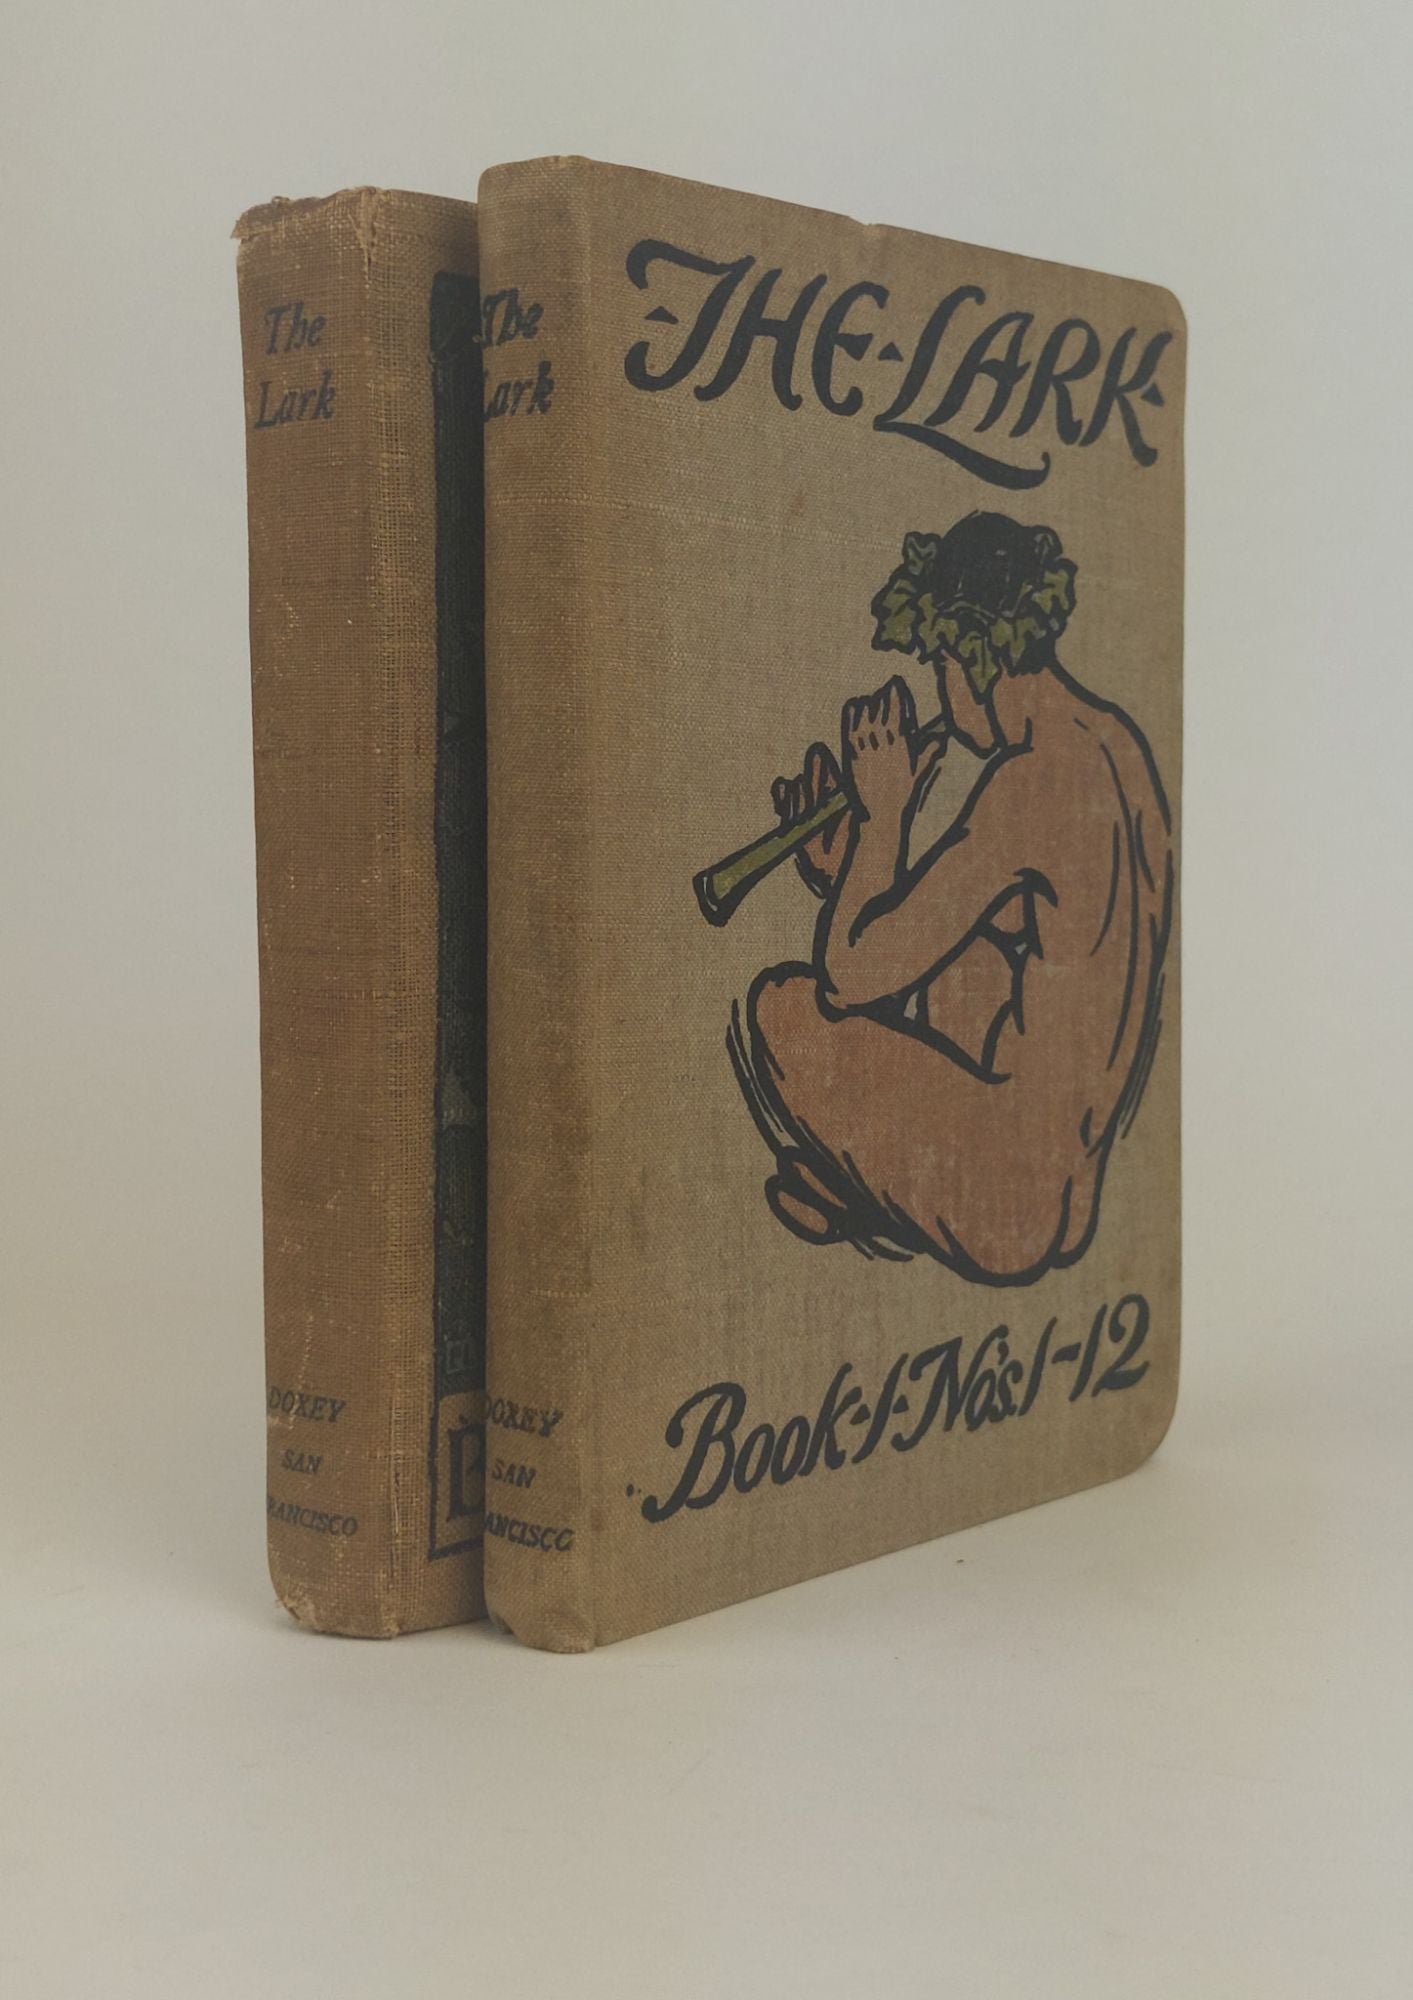 Product Image for THE LARK [BOOK I NO'S 1-12 & BOOK II NO'S 13-24 + EPILARK] [Two Volumes]